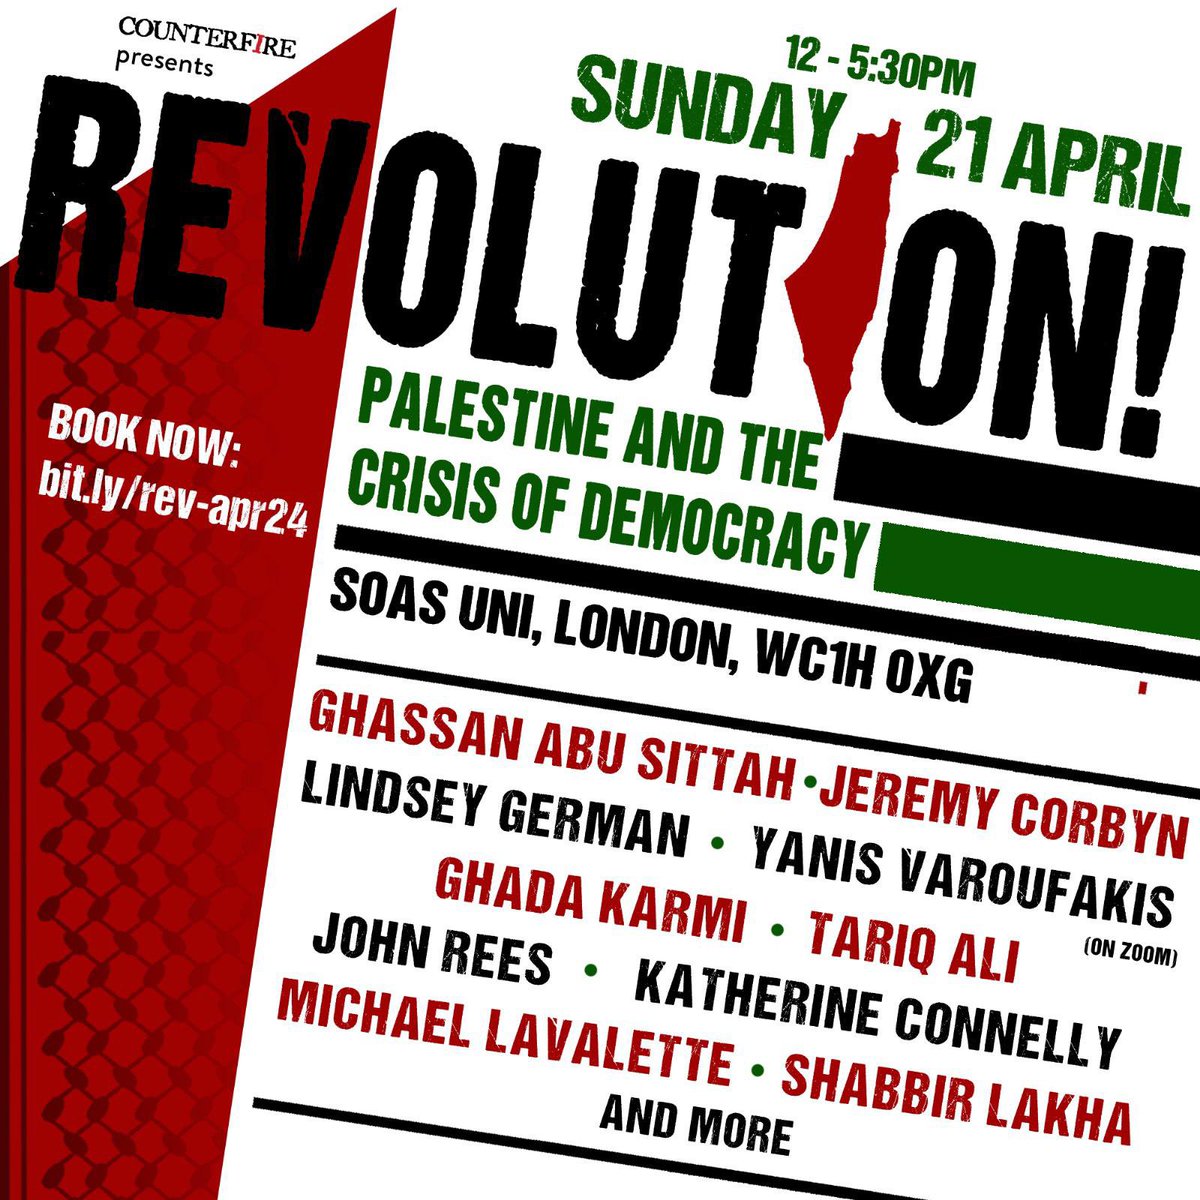 Looking forward to joining this great line up of speakers next Sunday eventbrite.co.uk/e/revolution-p…